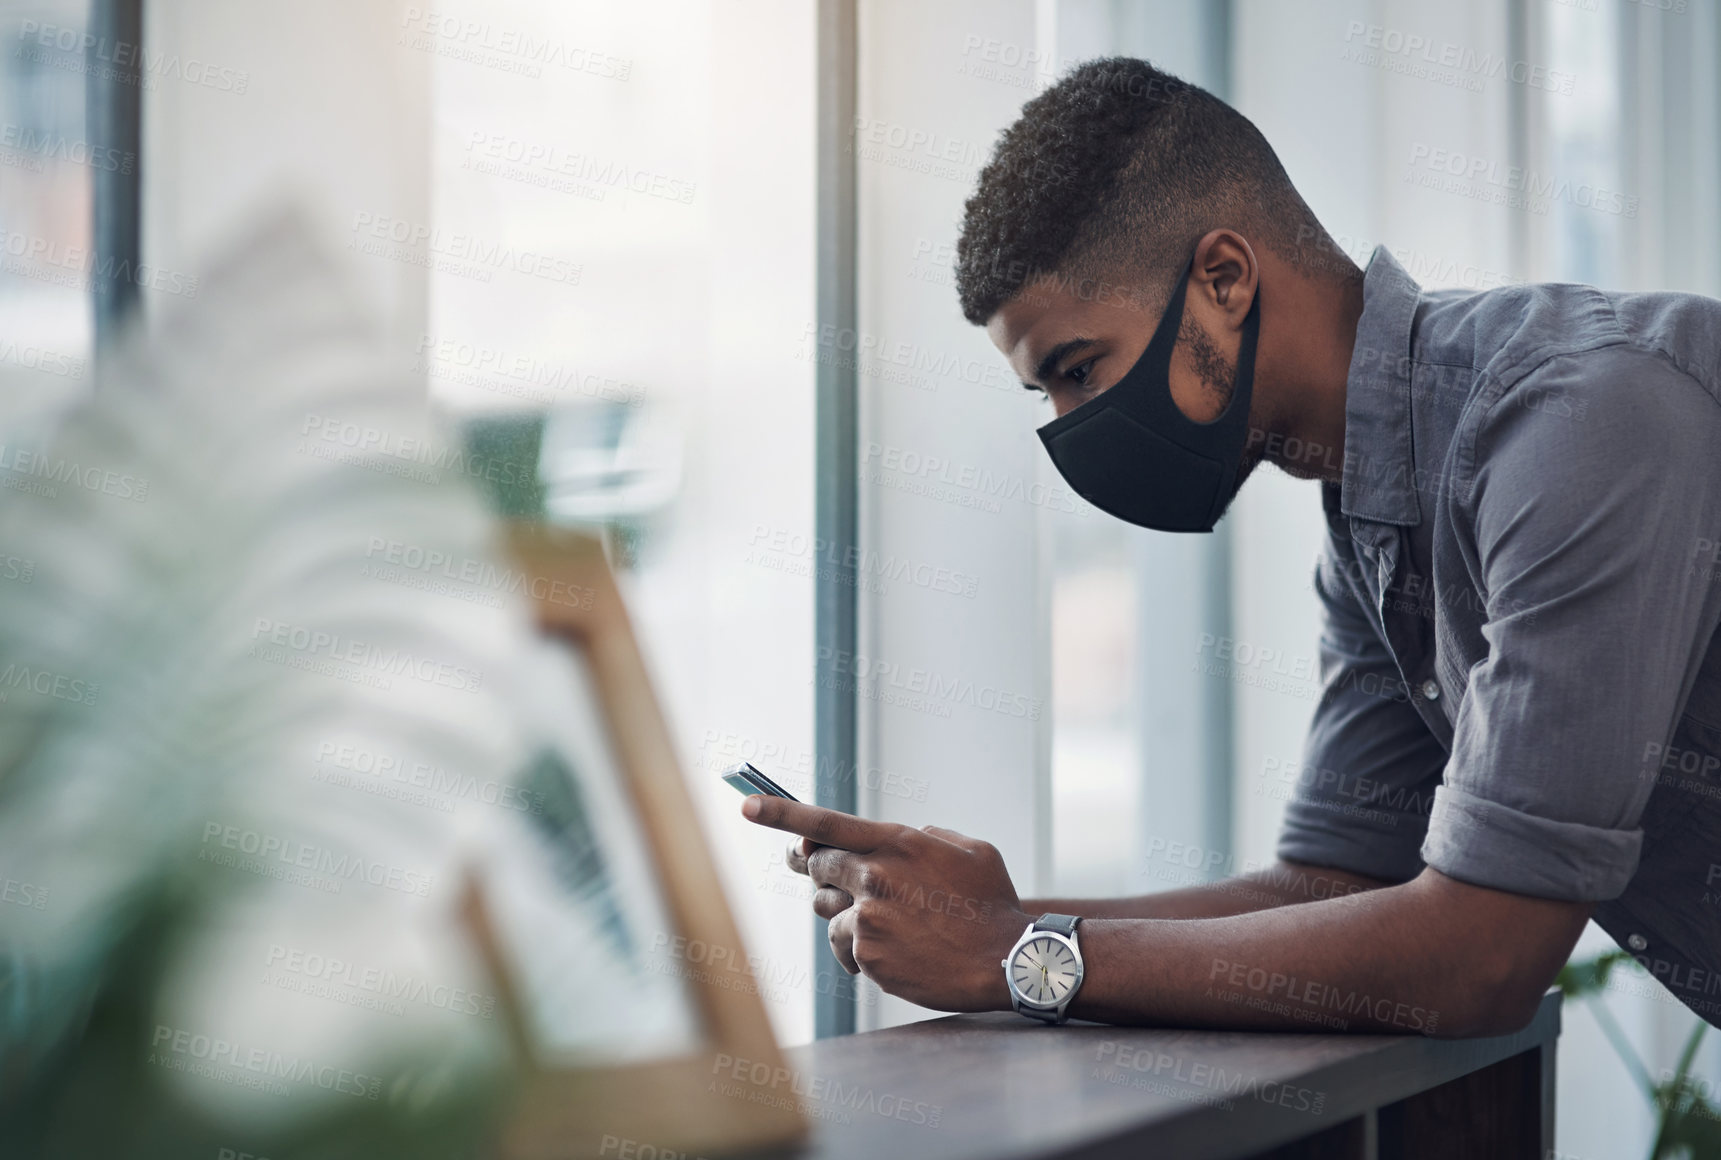 Buy stock photo Shot of a young businessman wearing a face mask while using a cellphone in an office